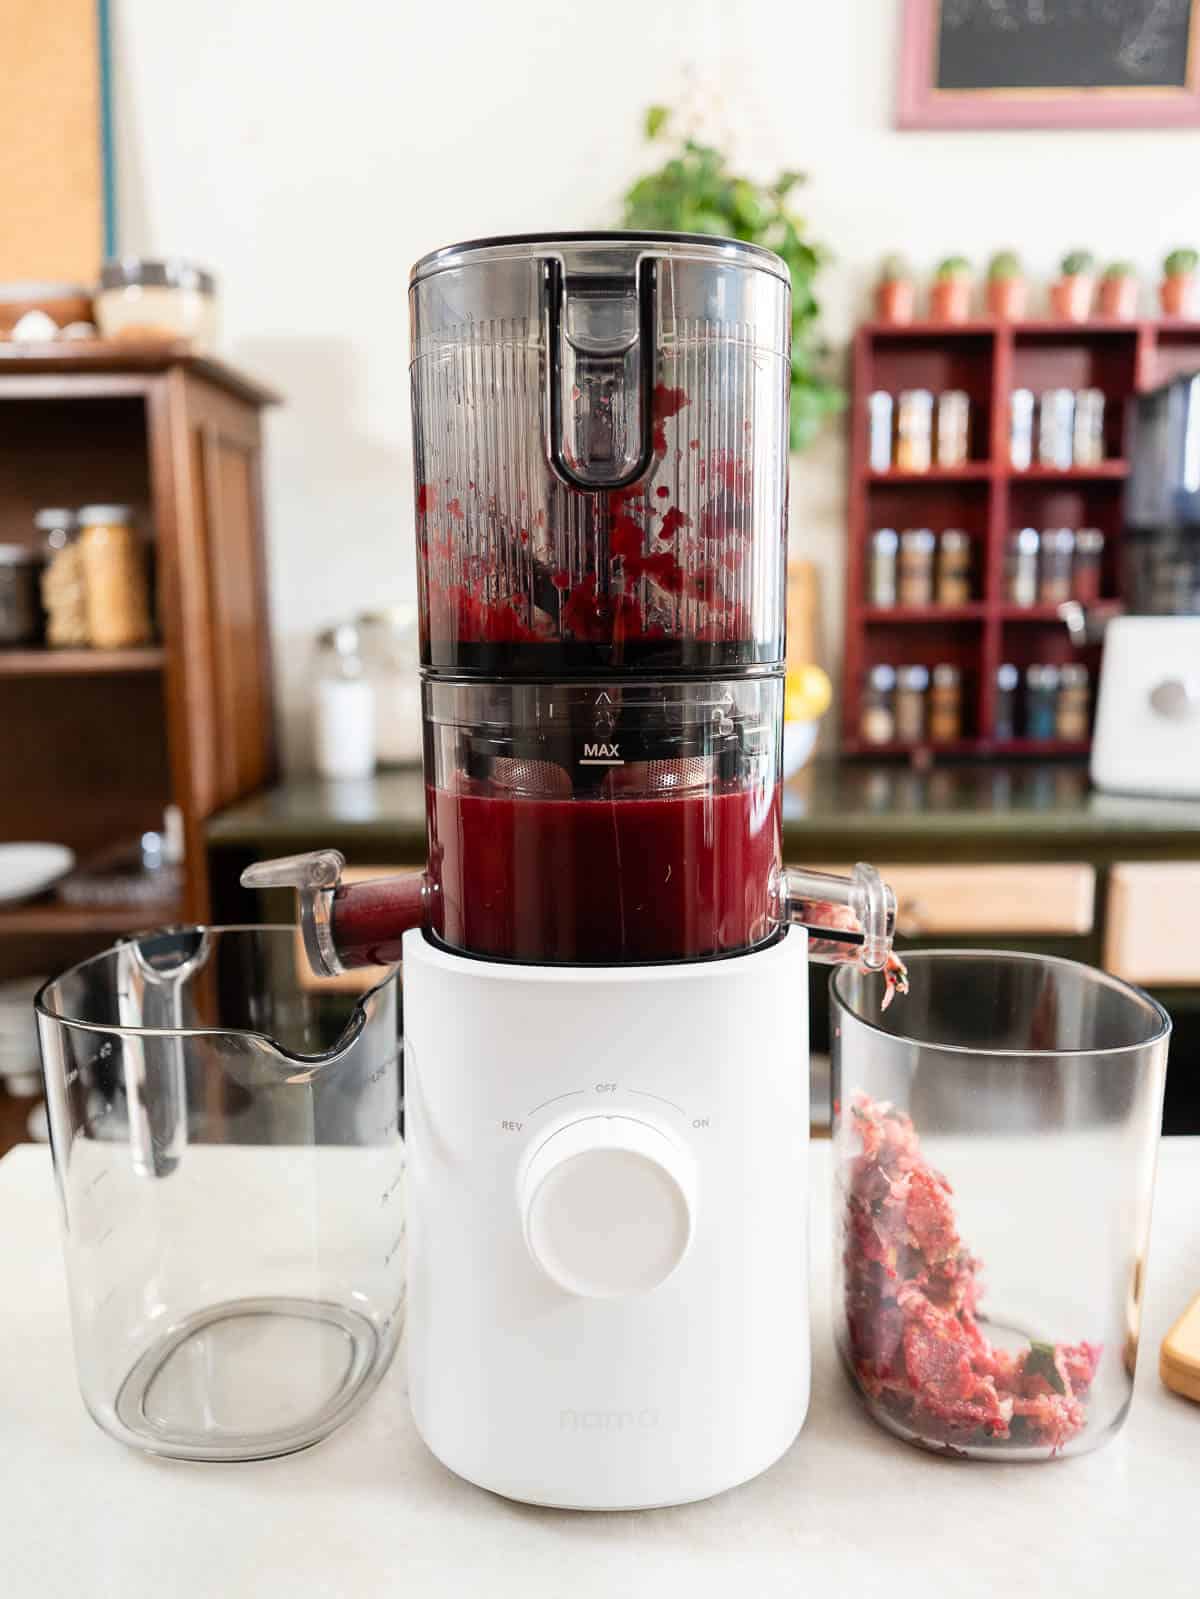 cold press juicer with juice in the chamber and pulp falling into the pulp container.